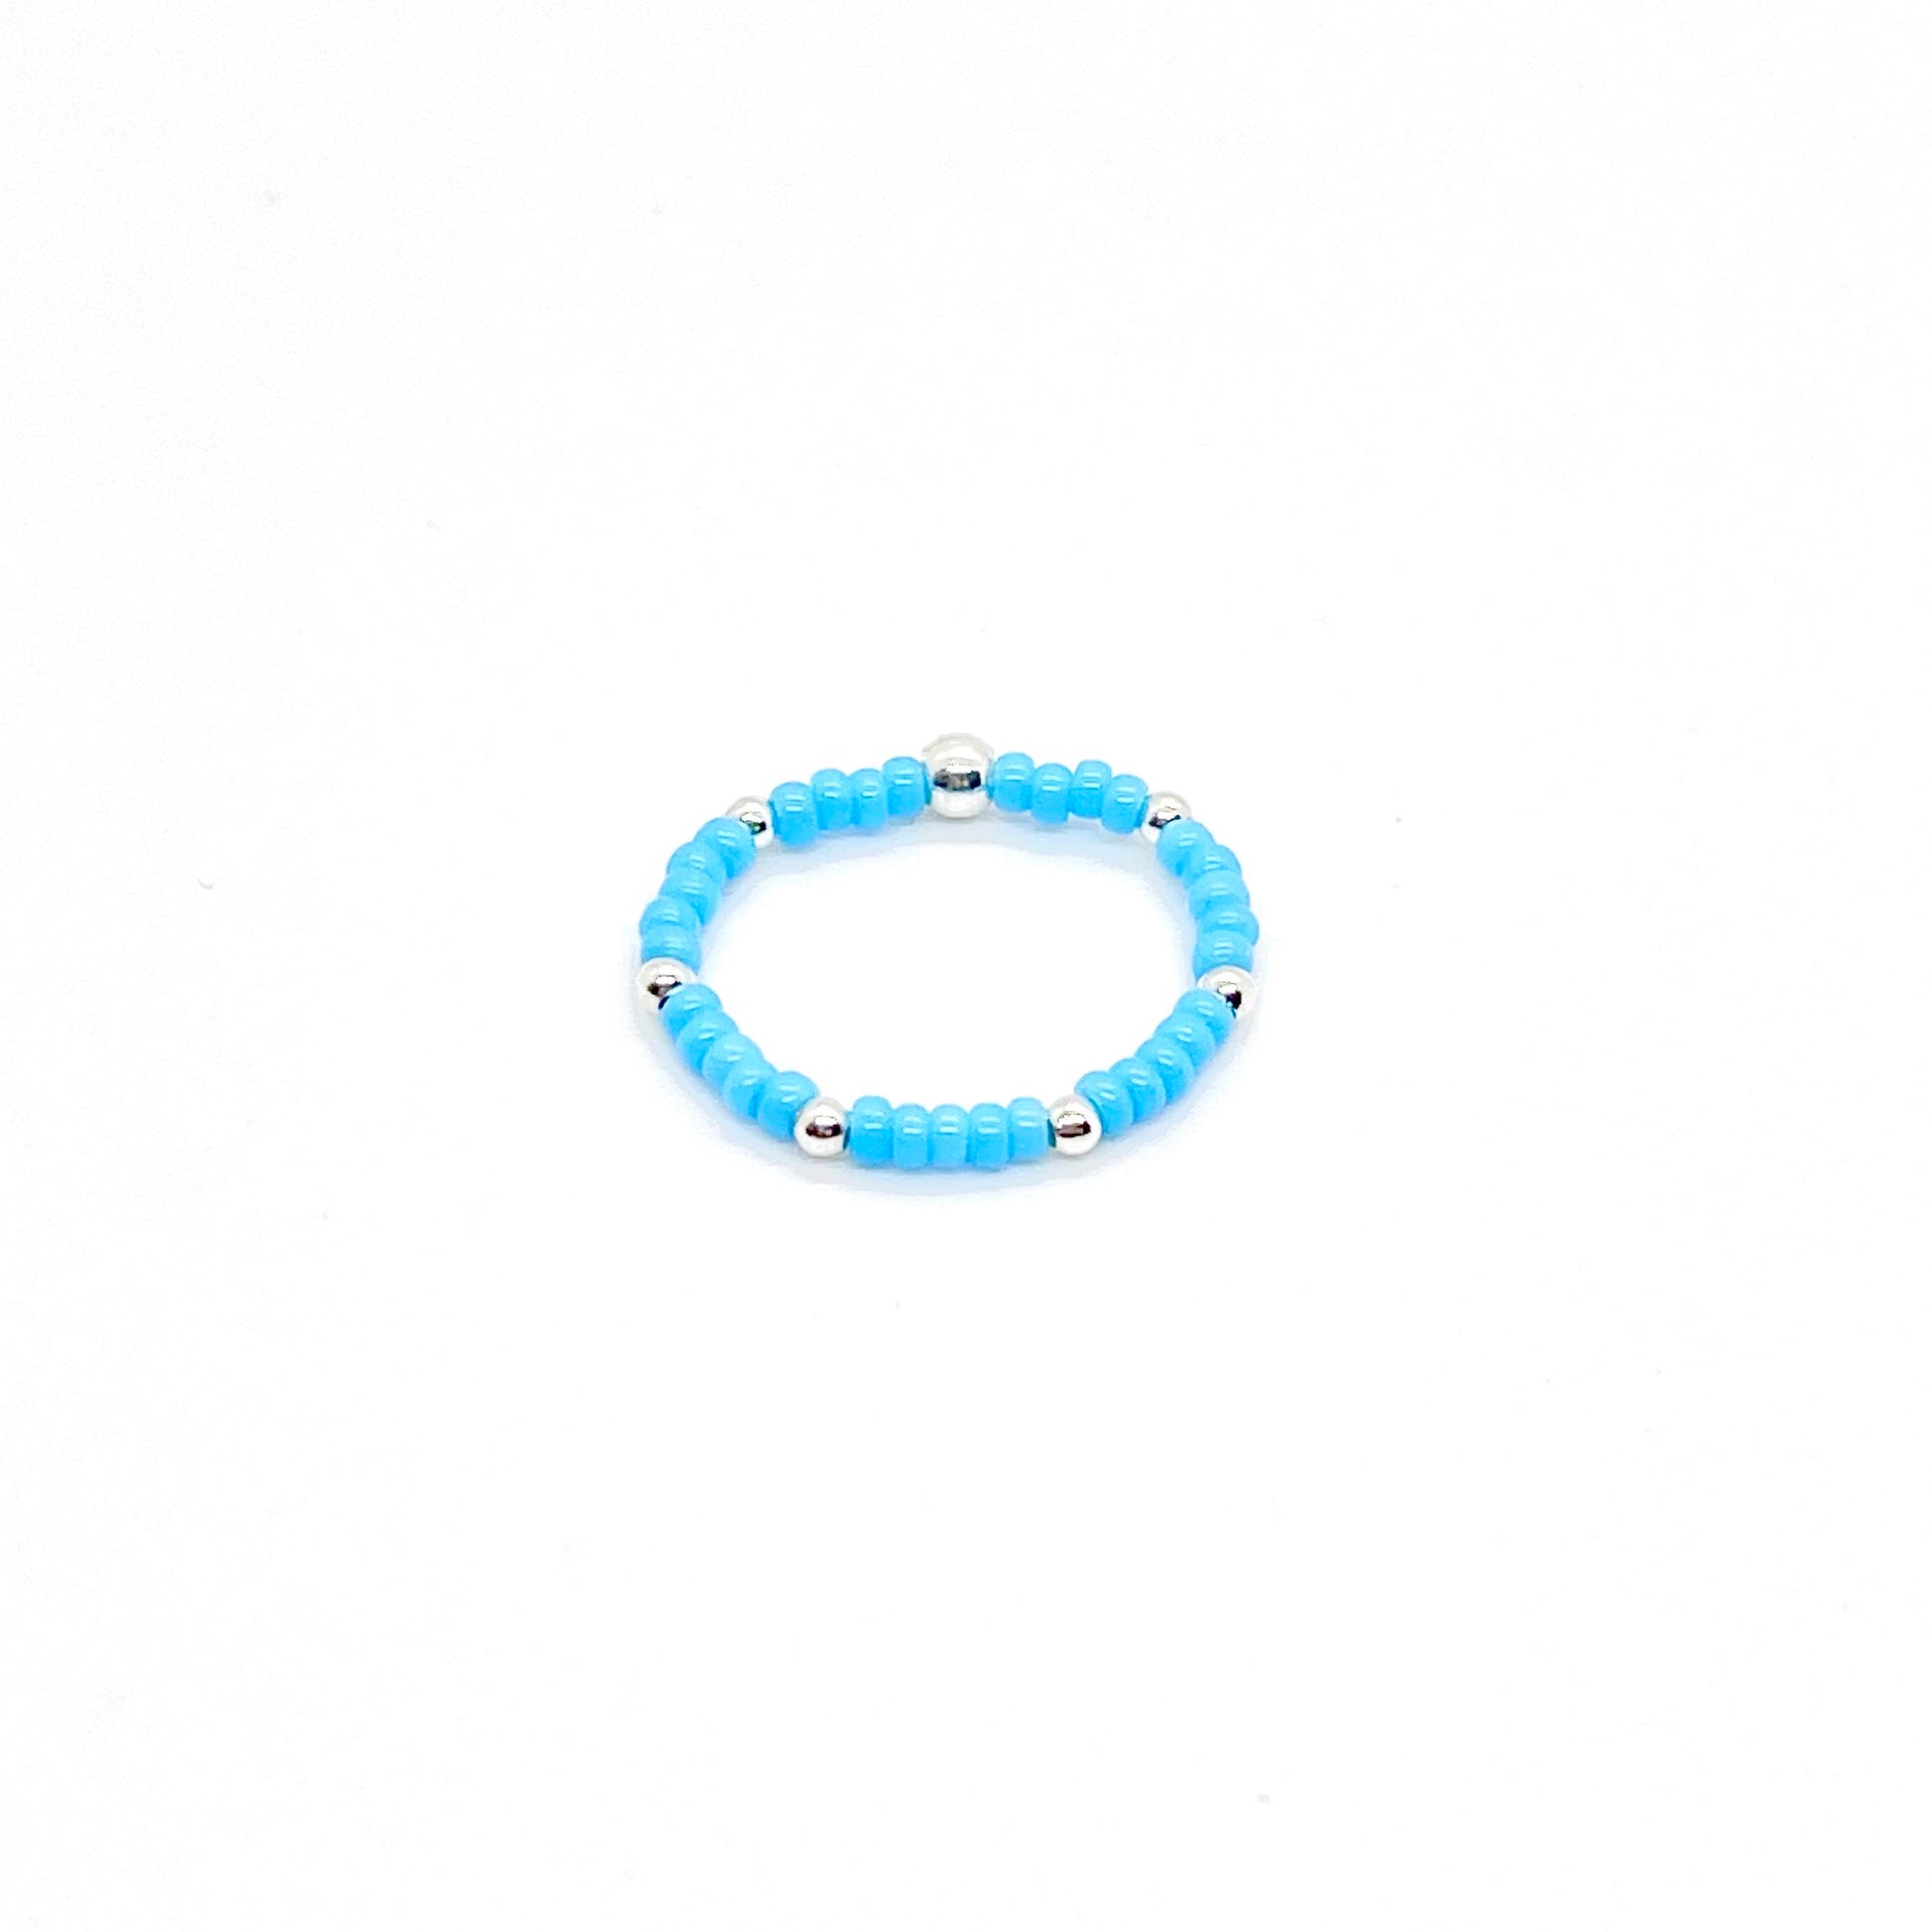 Stretch ring | Blue seed bead ring with 2mm silver ball accent beads.